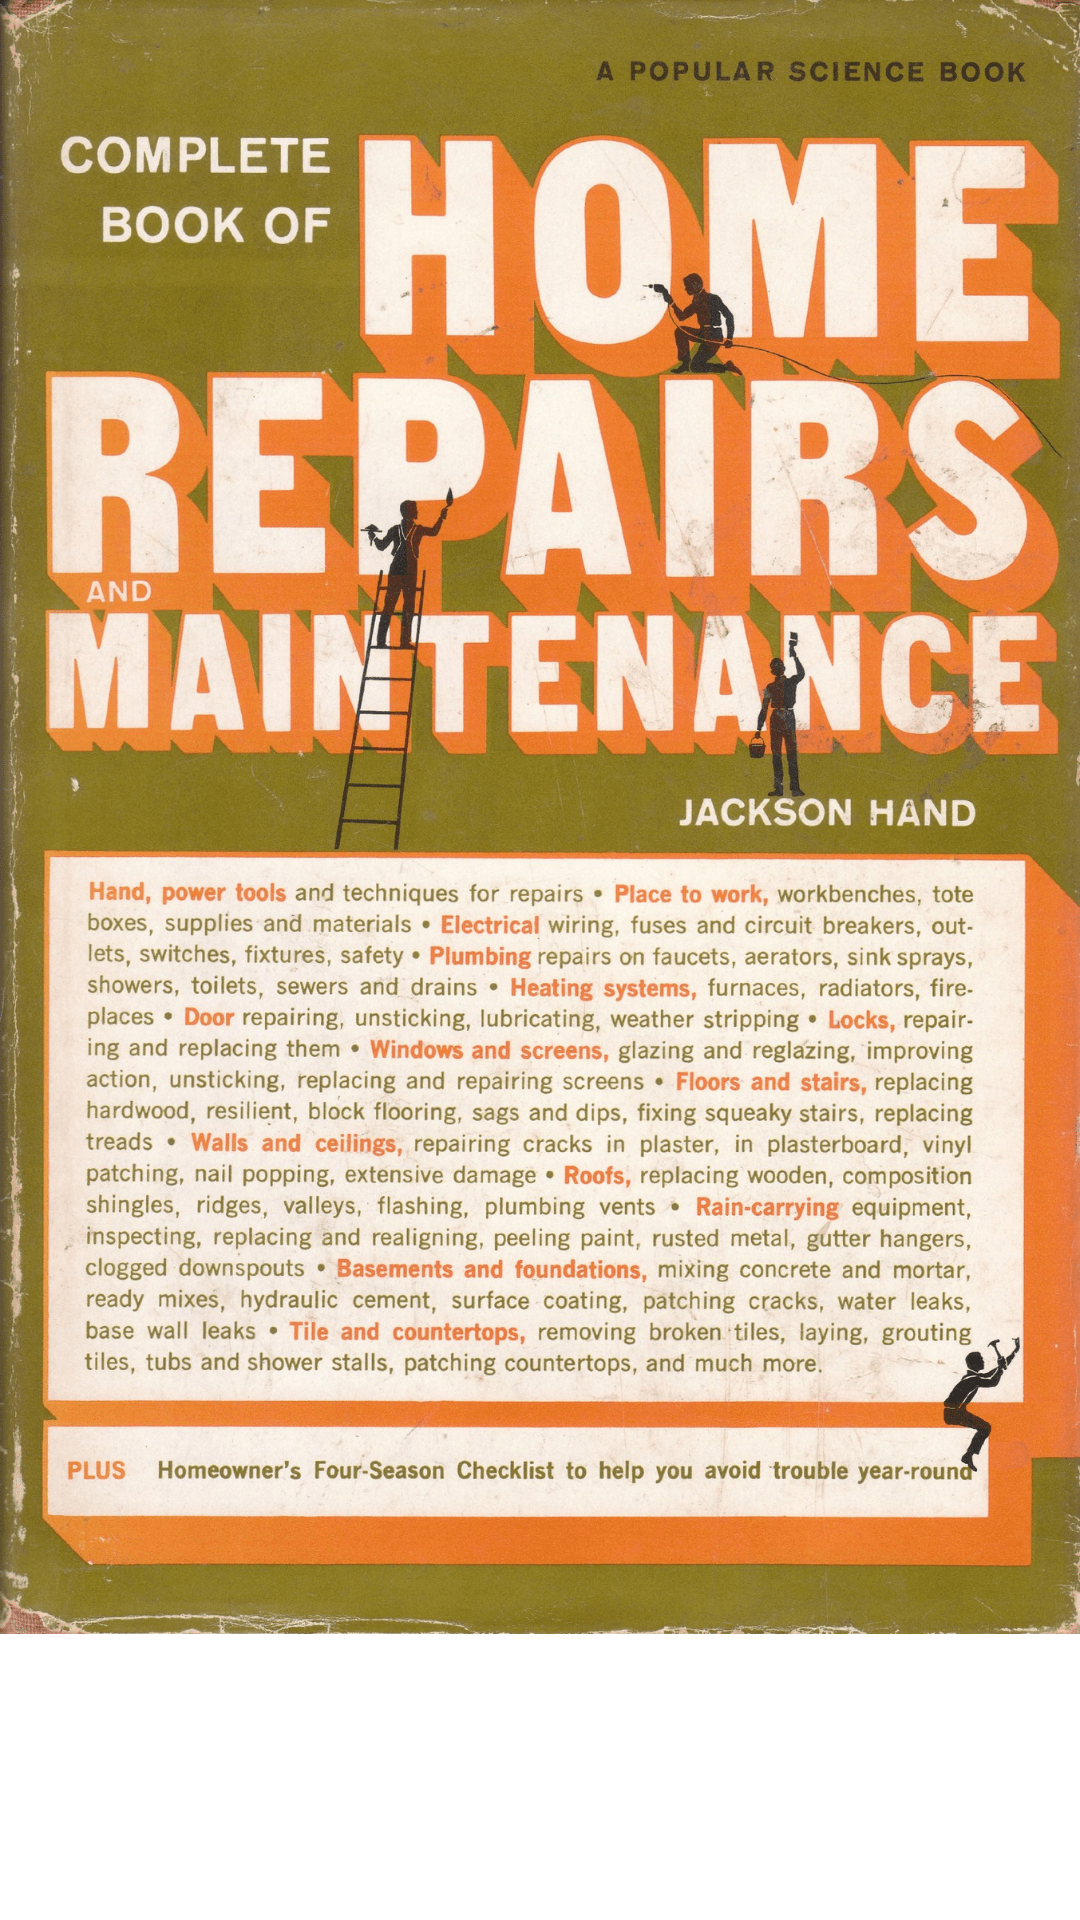 Complete Book of Home Repairs and Maintenance